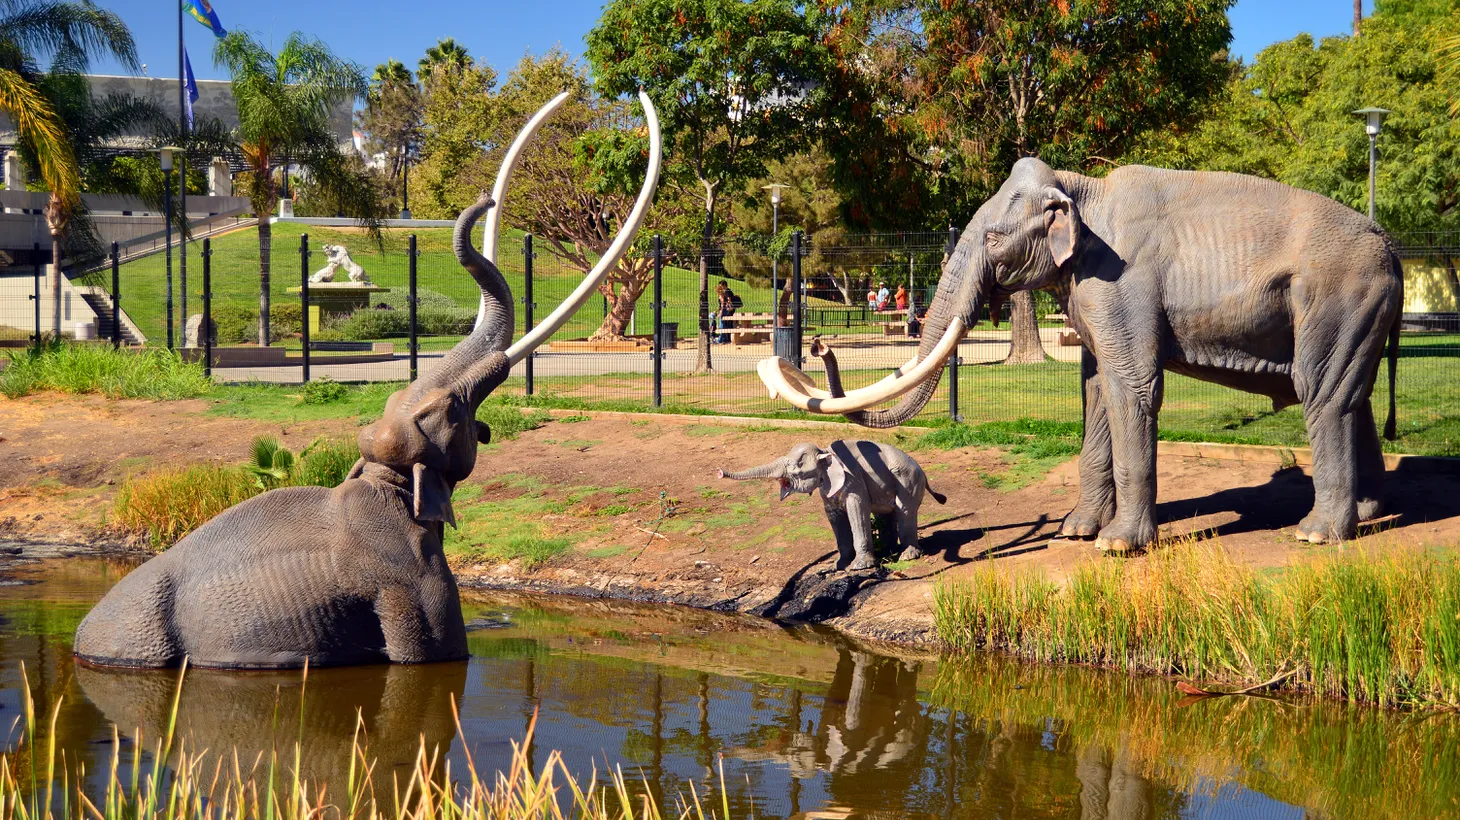 The La Brea Tar Pits are getting a redesign that will include a new museum wing and a bridge over the lake.